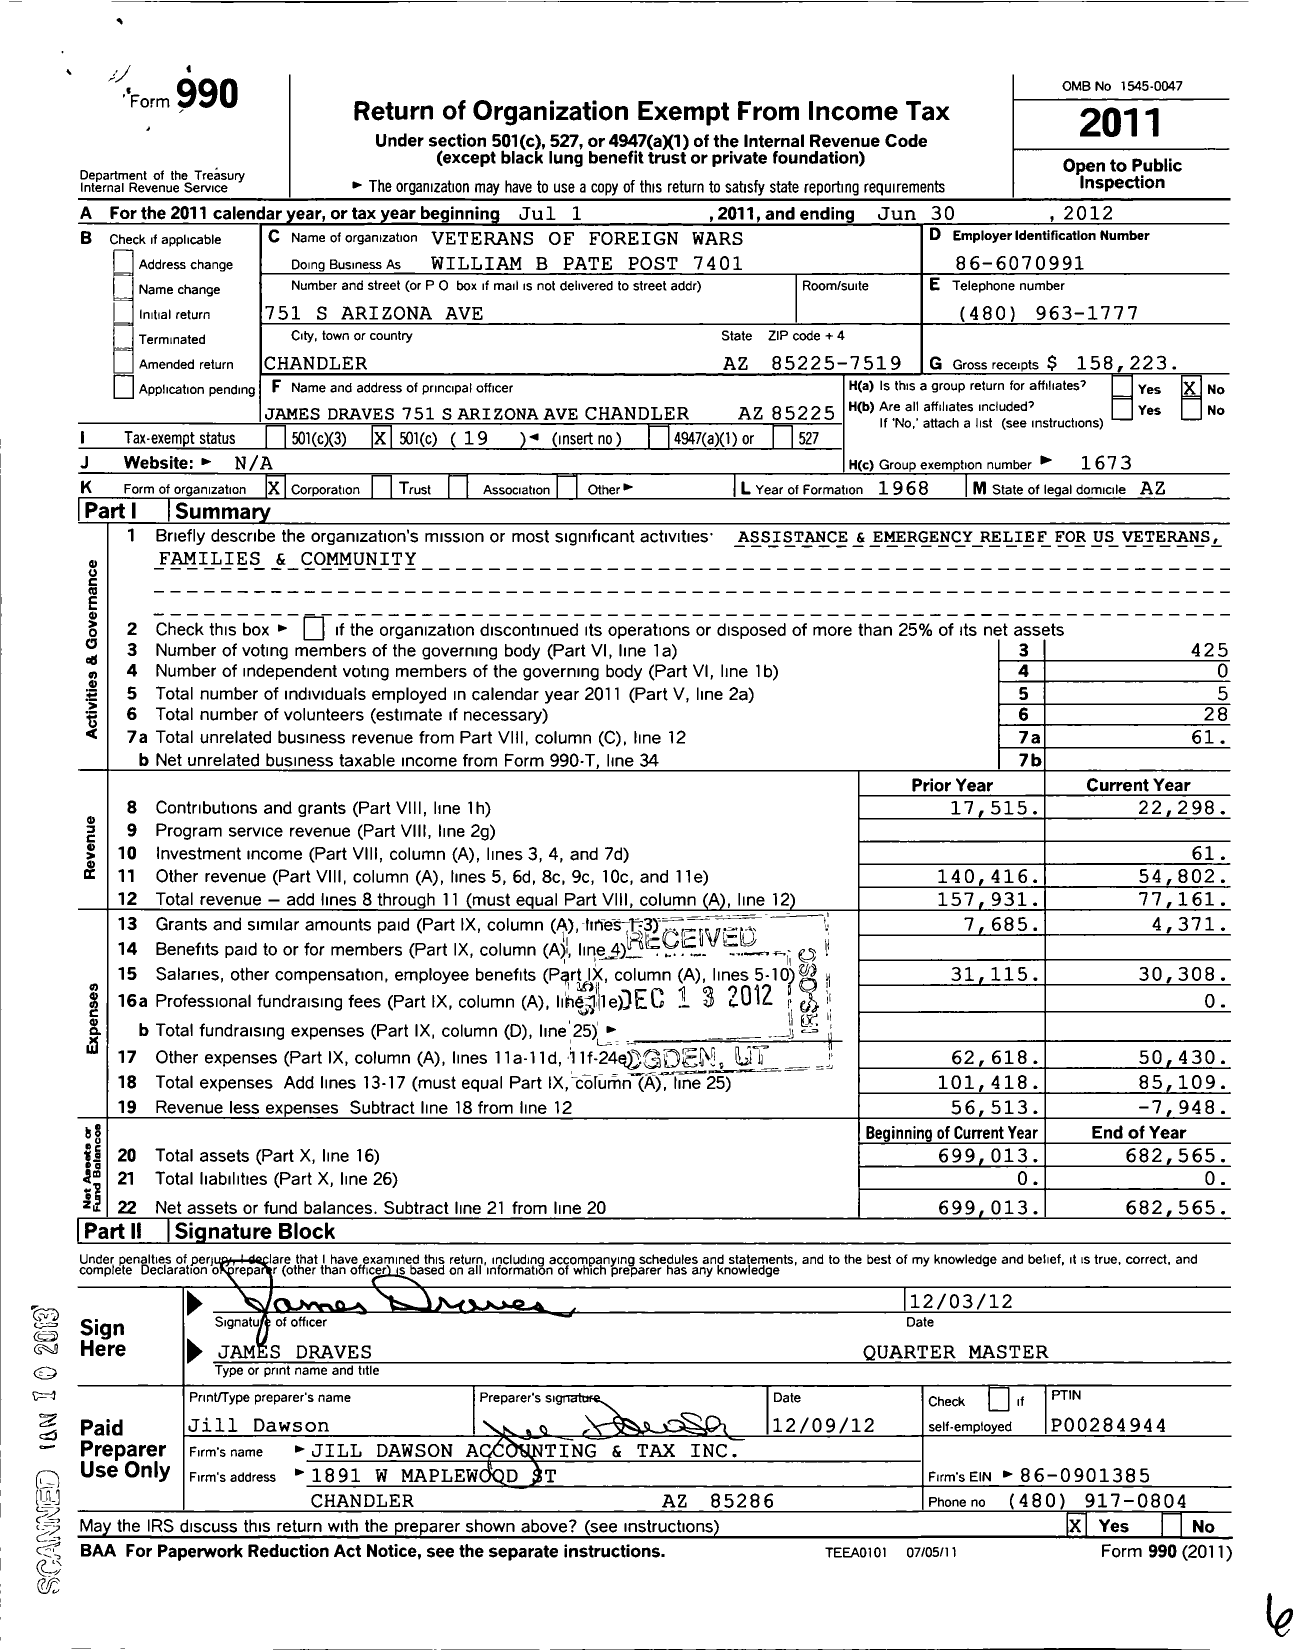 Image of first page of 2011 Form 990O for Veterans of Foreign Wars / 7401 William B Pate Post